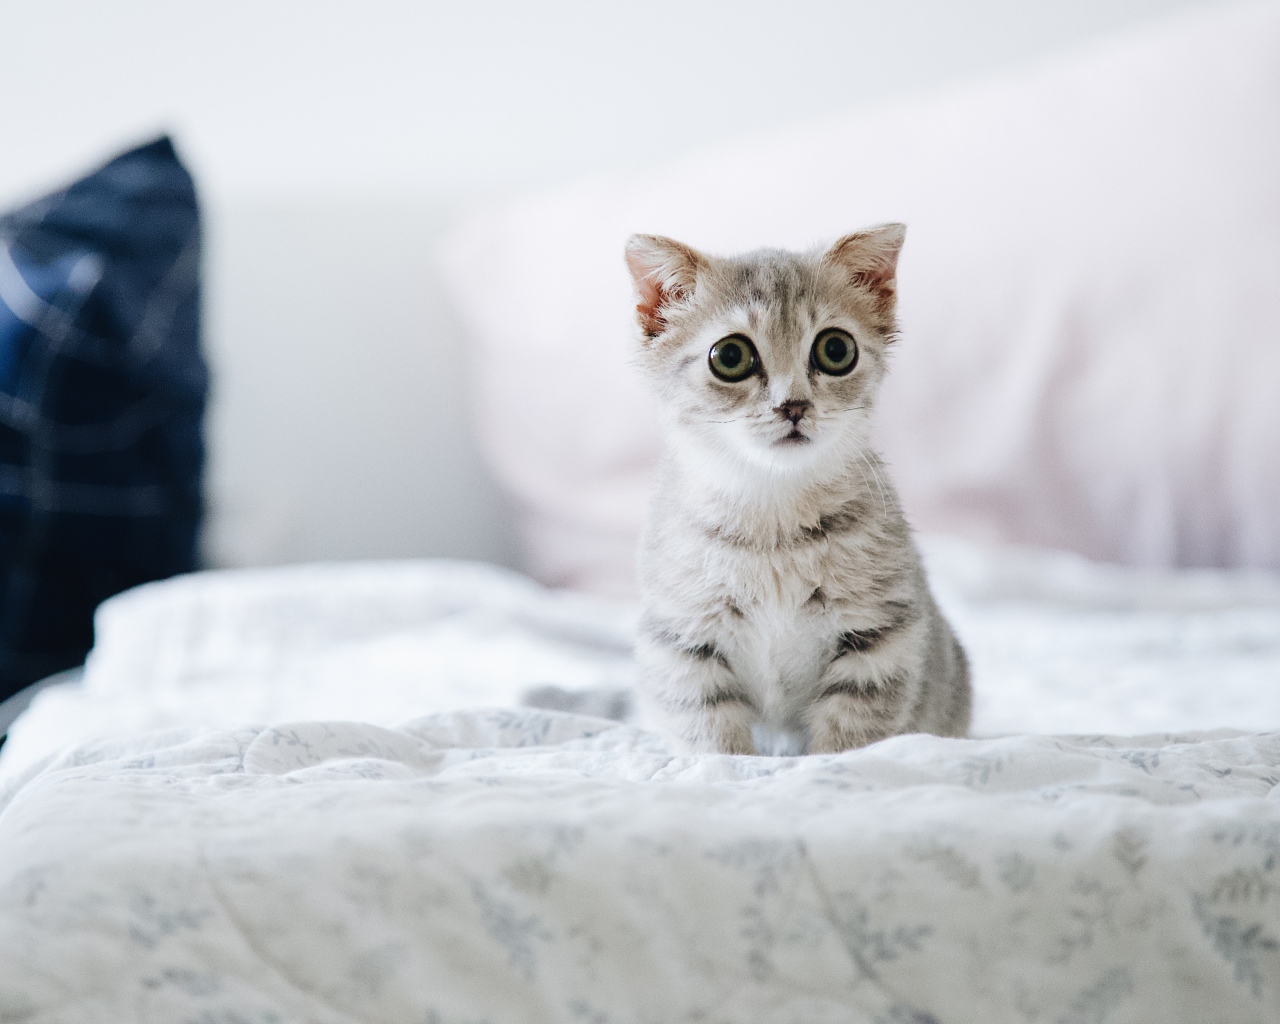 Little scared kitten sitting on the bed